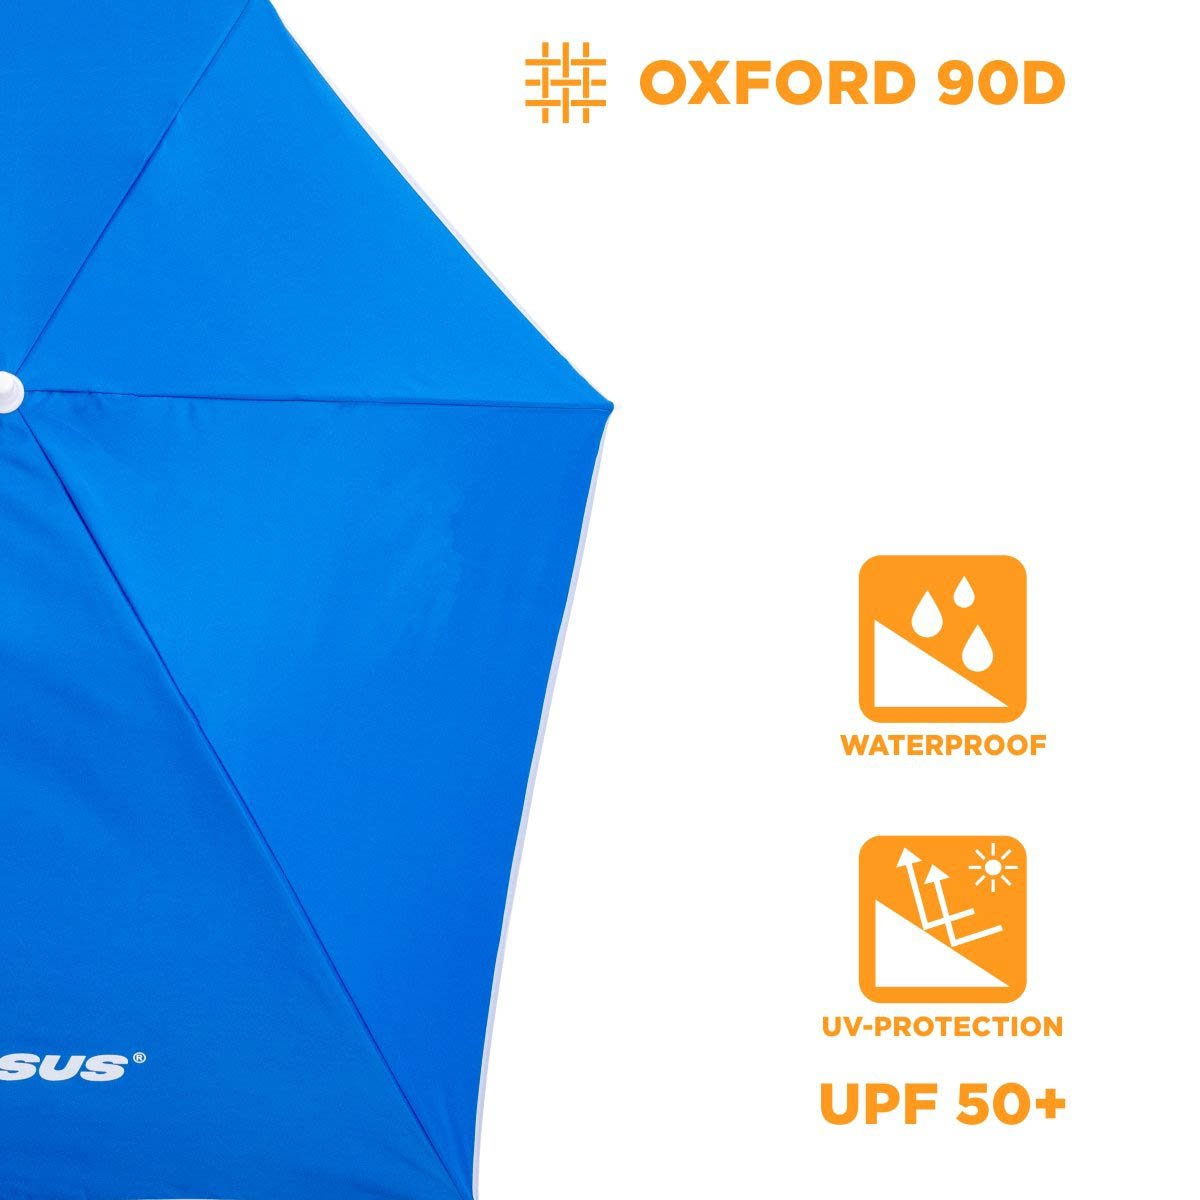 Strong Clip-On Adjustable Beach Umbrella is made of waterproof Oxford 90D featuring the UV protection